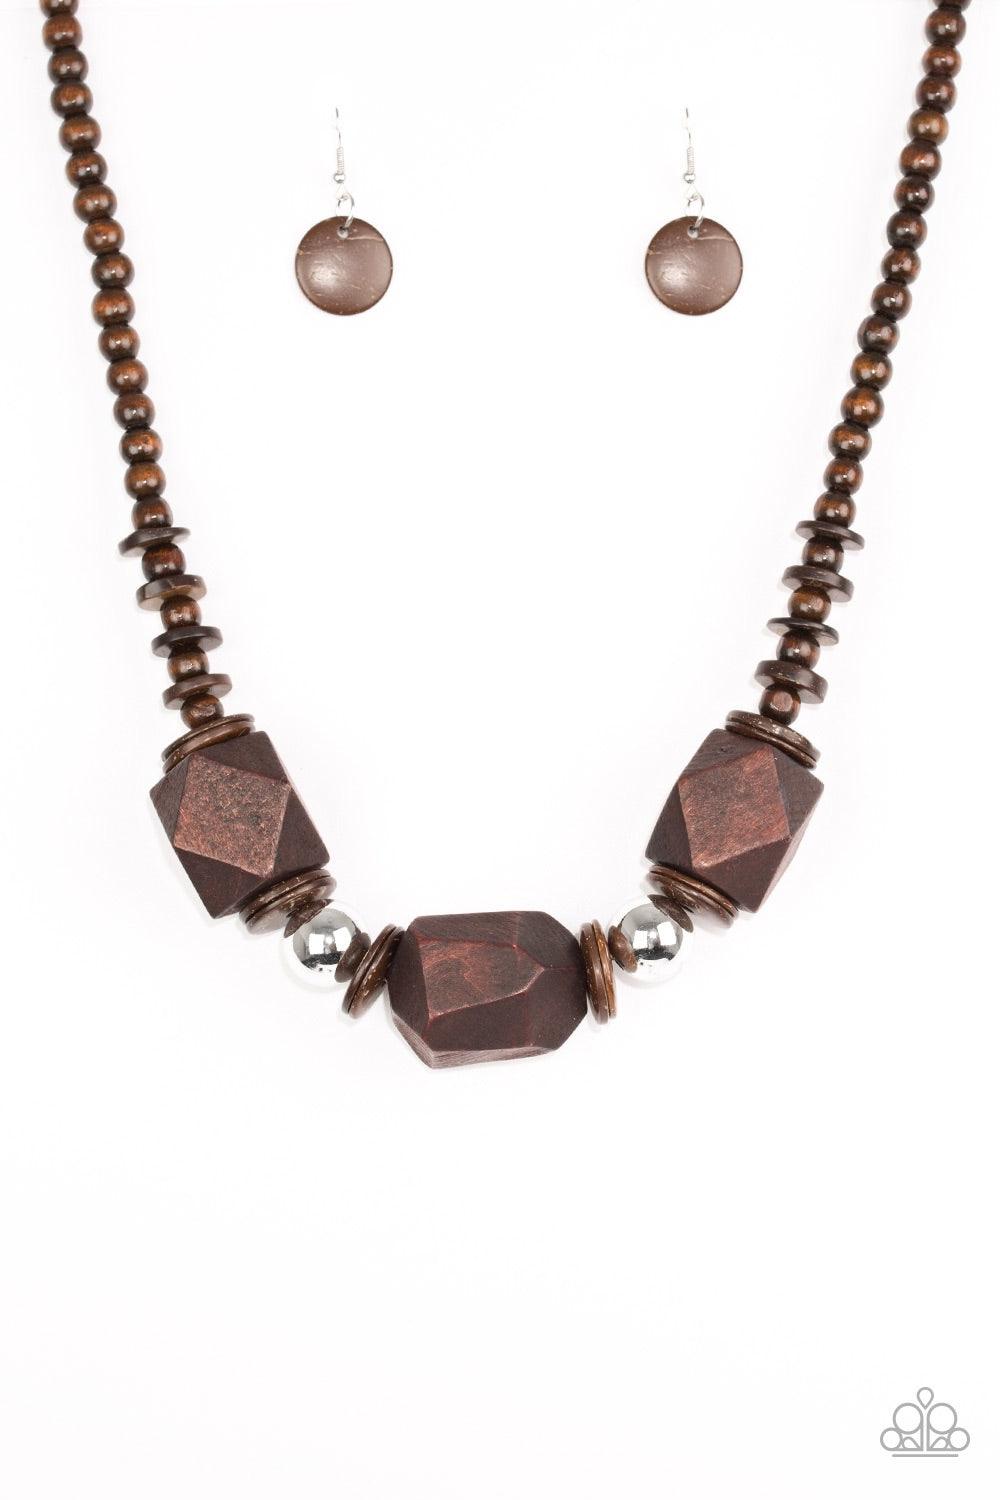 Paparazzi Accessories Costa Maya Majesty - Brown Featuring abstract geometric finishes, mismatched brown wooden beads are threaded along shiny brown cording. Dramatic silver beads are sprinkled between the earthy beading, creating a bold seasonal look bel